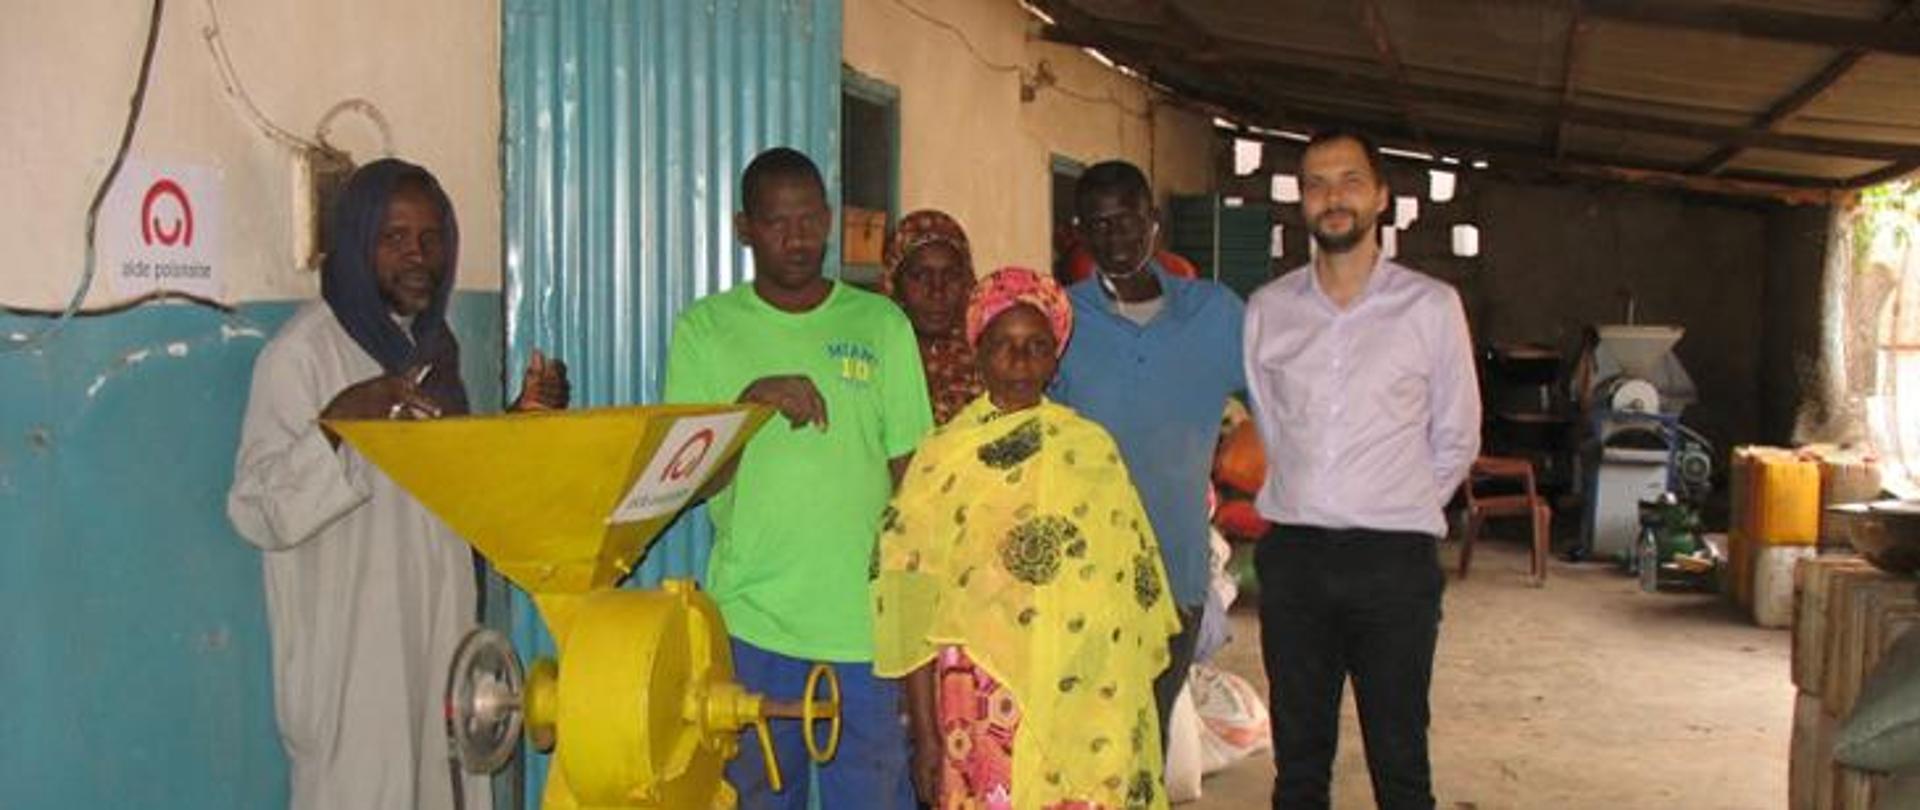 Purchase of a karité press for the GIE women’s cooperative in Kédougou
